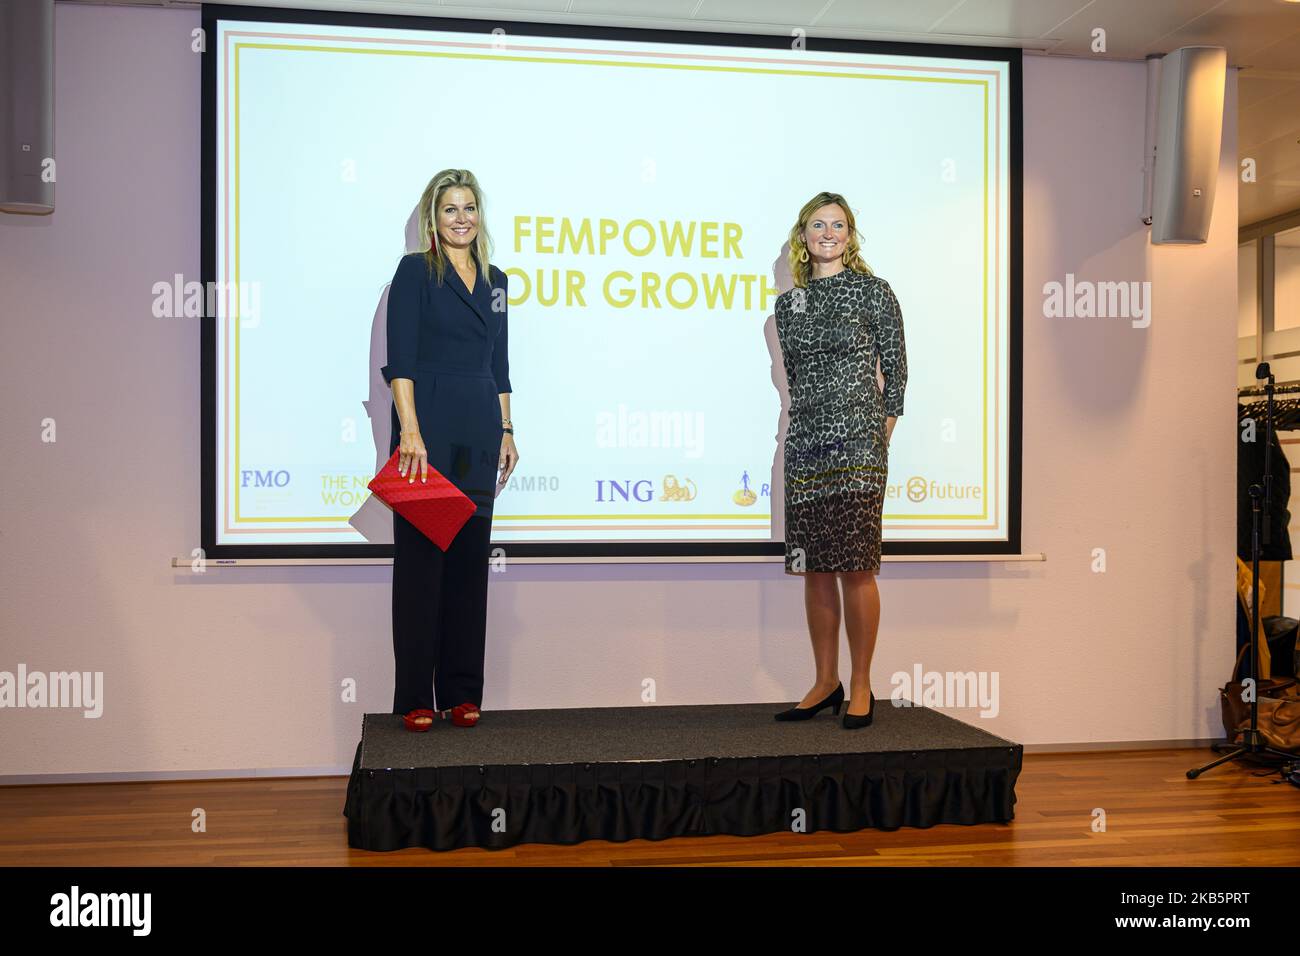 Queen Maxima of the Netherlands and Chantal Korteweg (R) attend the workshop Fempower your growth program at the Dutch development bank, FMO, in The Hague, The Netherlands, 11 September 2019. This program from FEM.NL and The Next Women, focuses on stimulating female entrepreneurship and improving access to finance for female entrepreneurs. The ''FEmpower Growth Program'' is a pilot-project that runs from June to September 2019 and is intended for female entrepreneurs and Bank representatives, aiming at improving access to finance, building relevant networks and increasing entrepreneurial skill Stock Photo